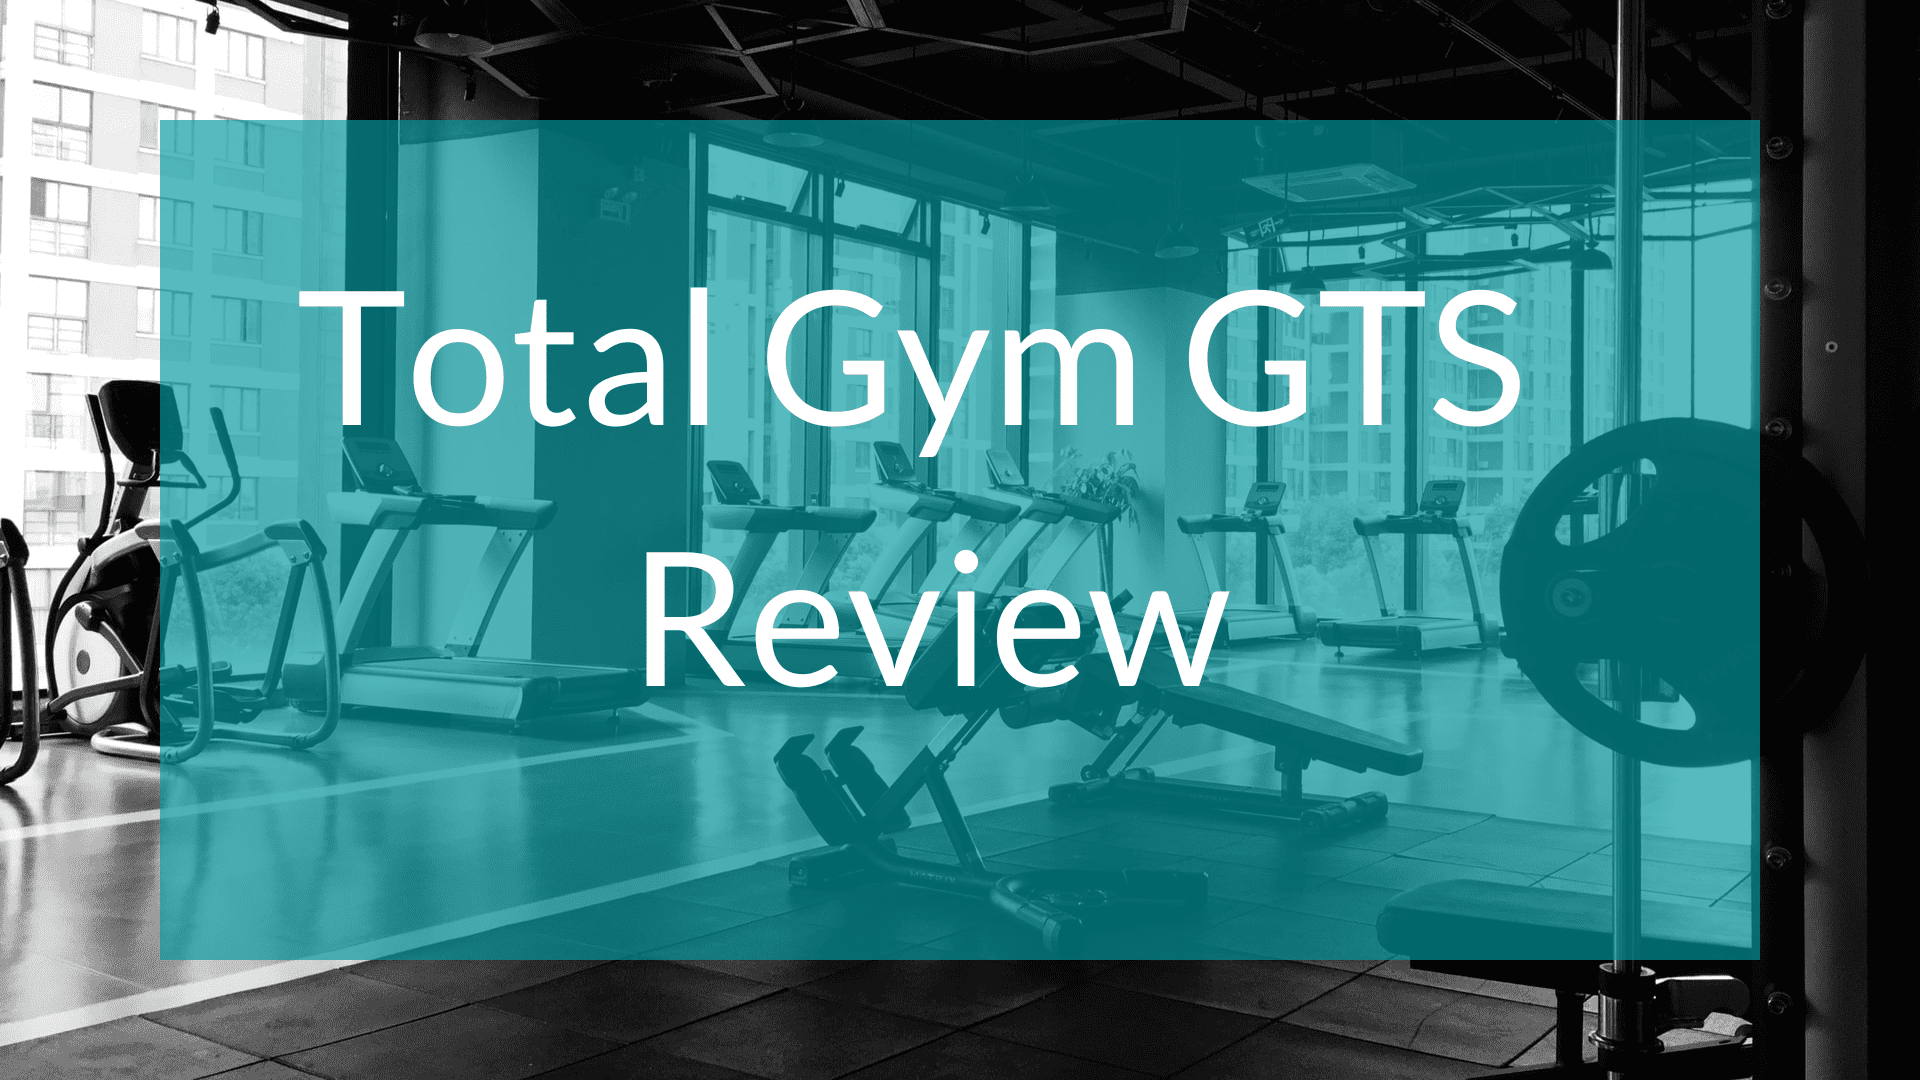 Total Gym GTS Review written in text with a gym in the background